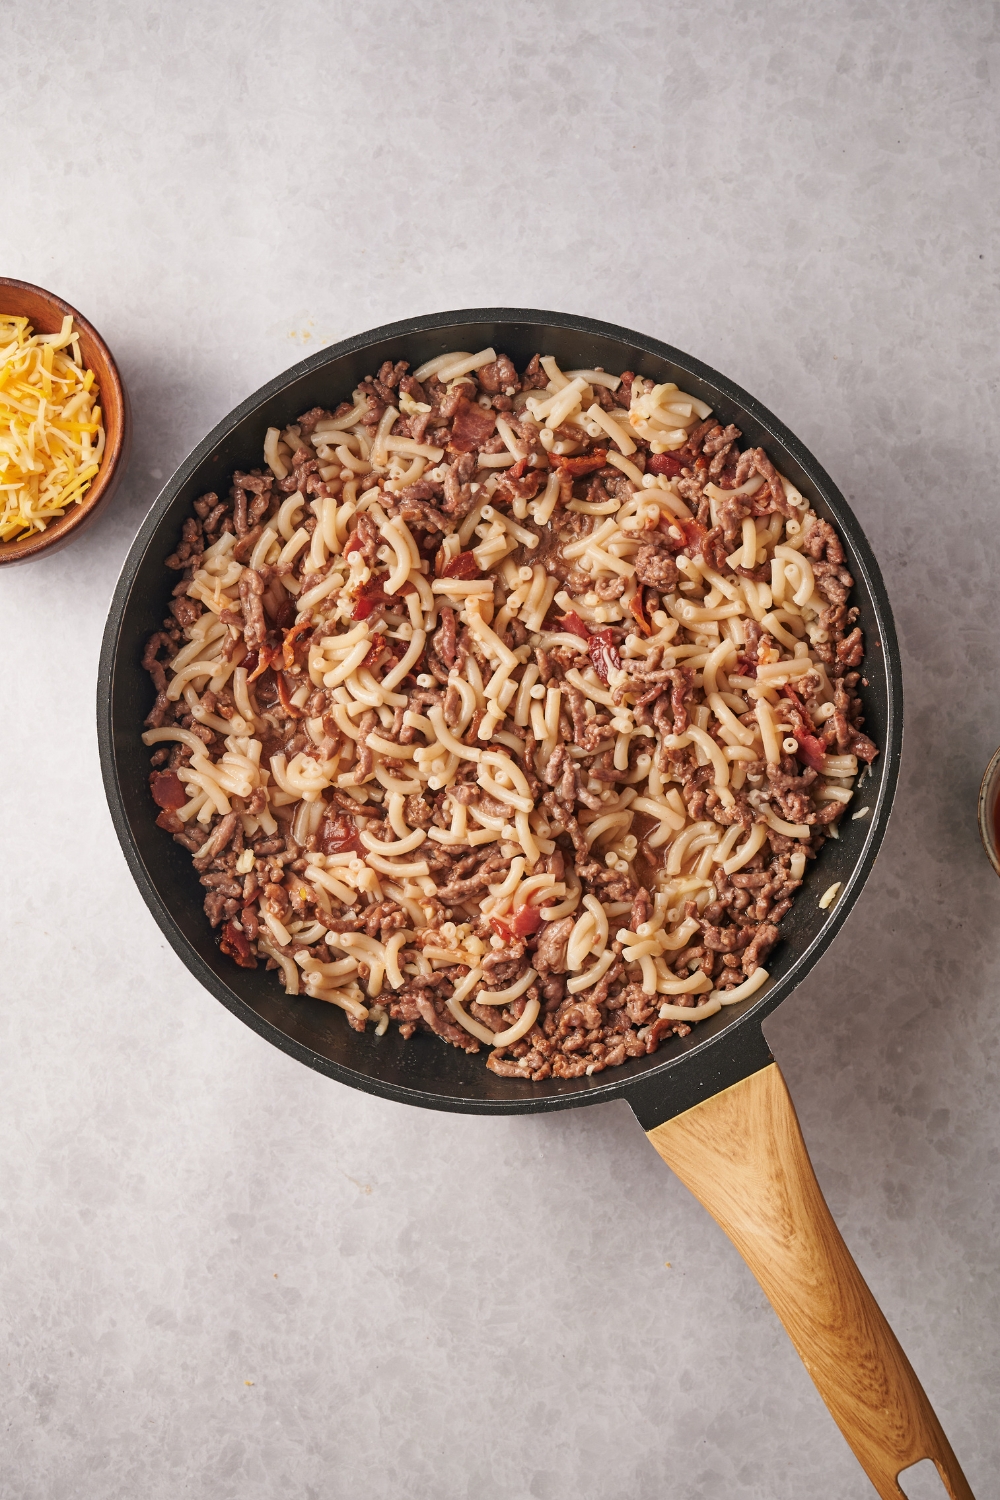 A skillet filled with cooked ground beef, bacon, and macaroni noodles.